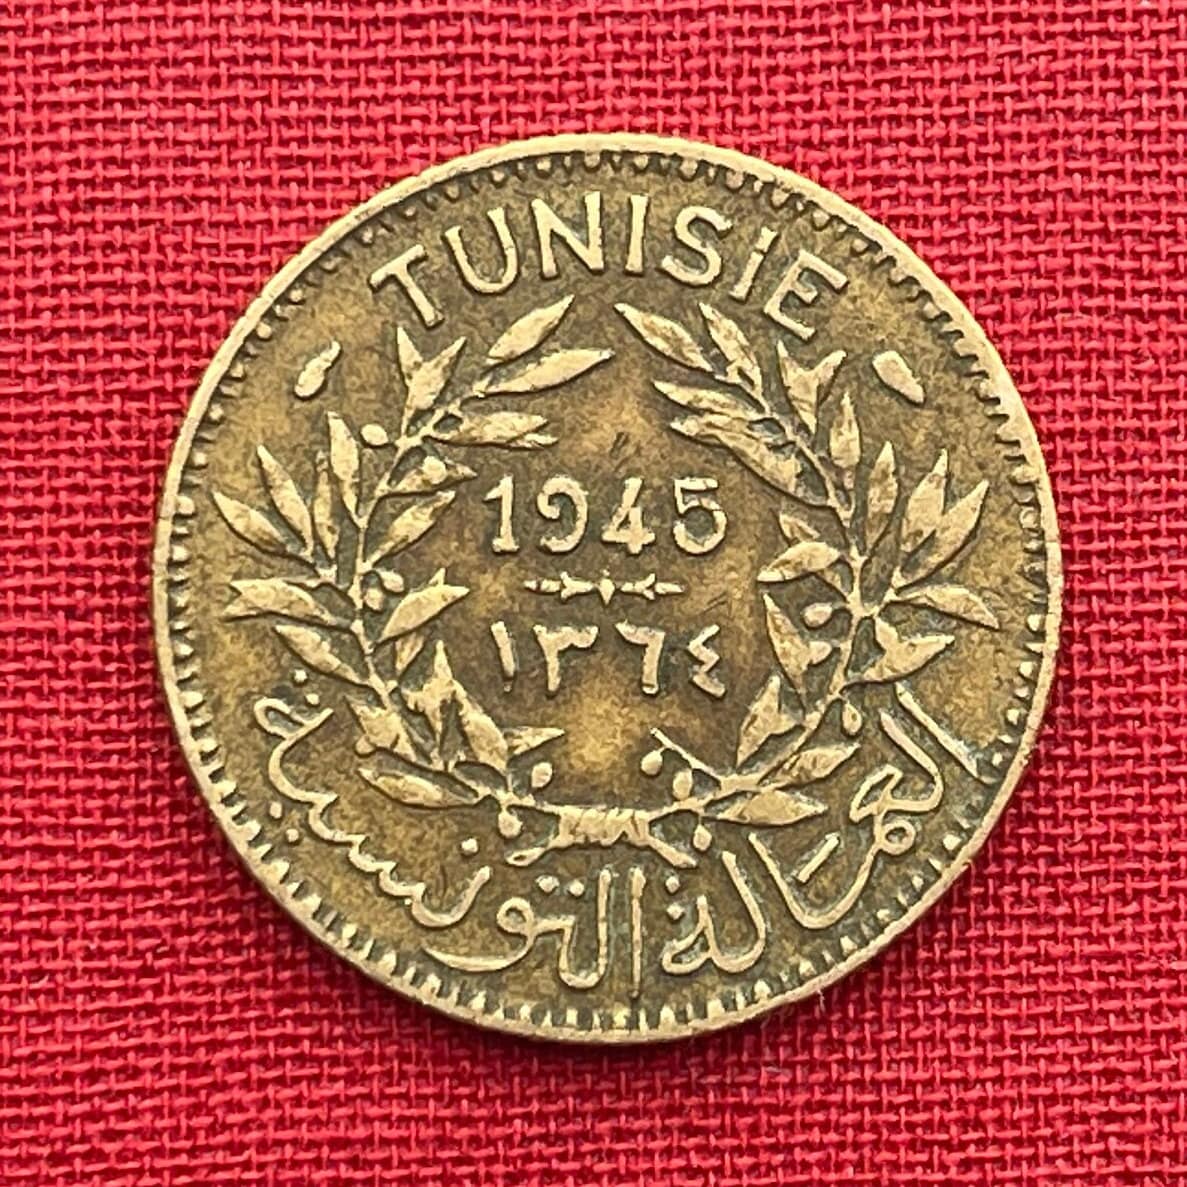 Olive Wreath 1 Franc Tunisia Authentic Coin Money for Jewelry and Craft Making (Tunisian Labour) (Chambers of Commerce Token) CONDITION:FINE